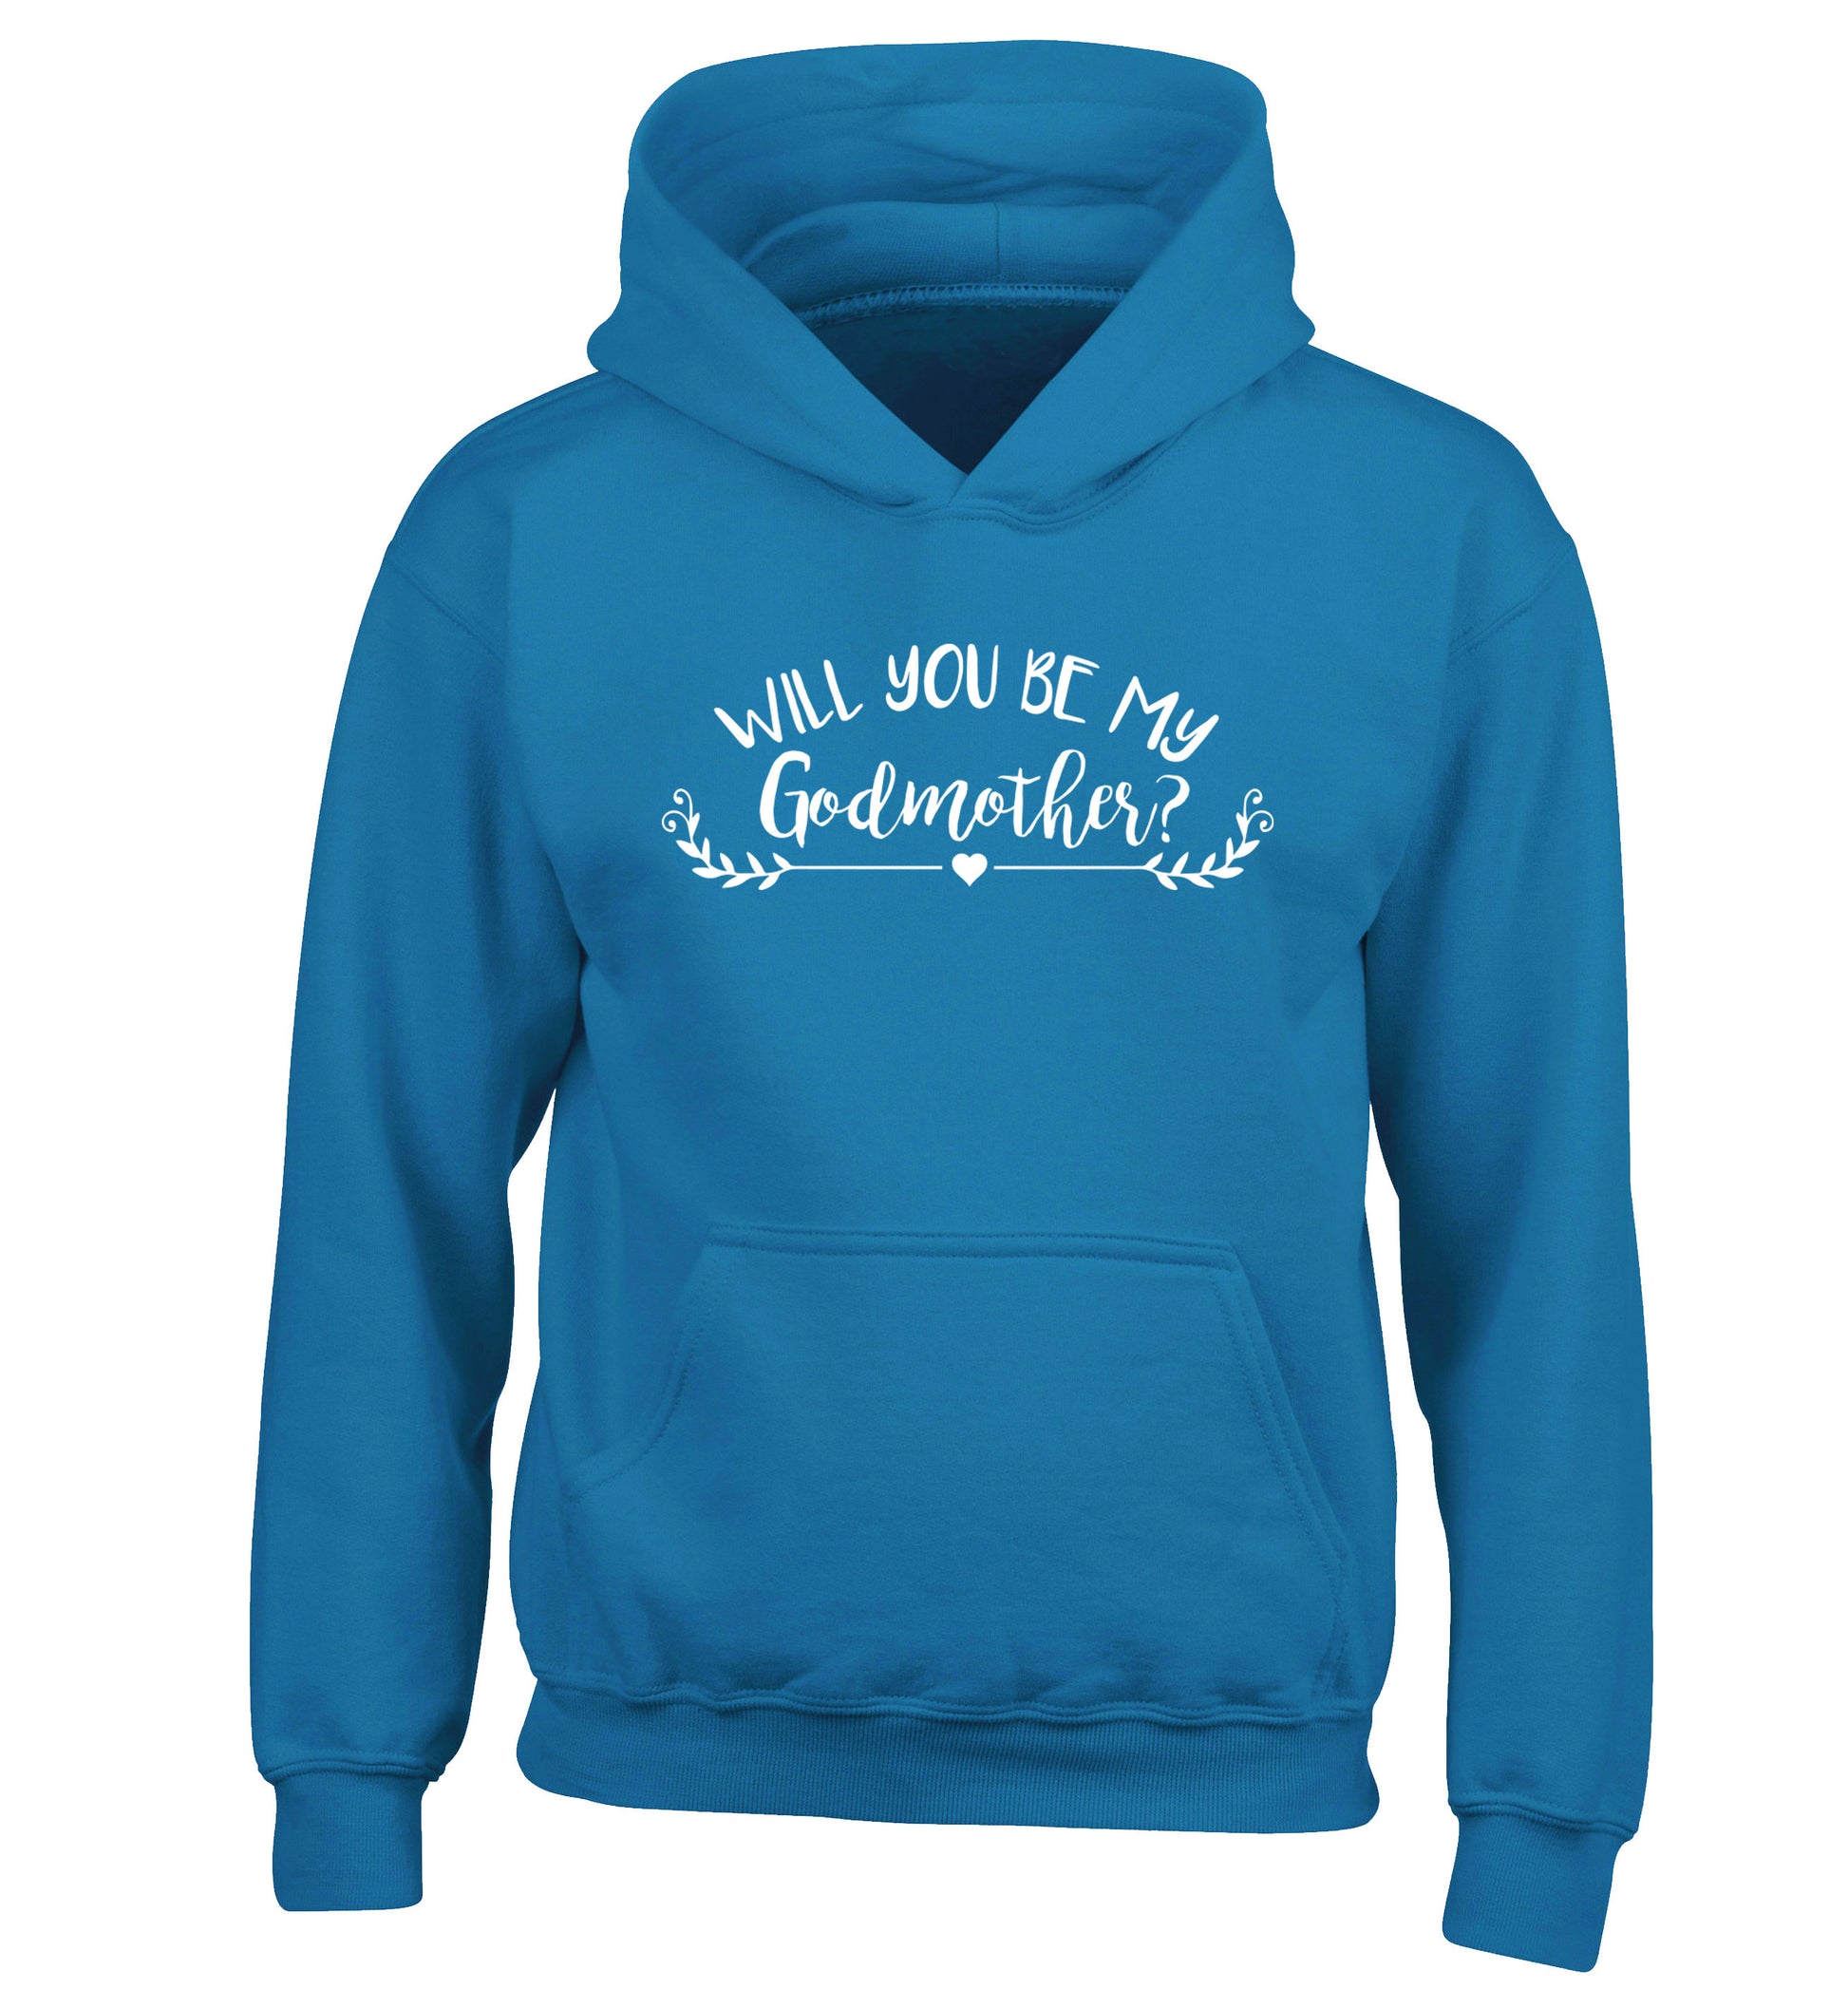 Will you be my godmother? children's blue hoodie 12-14 Years